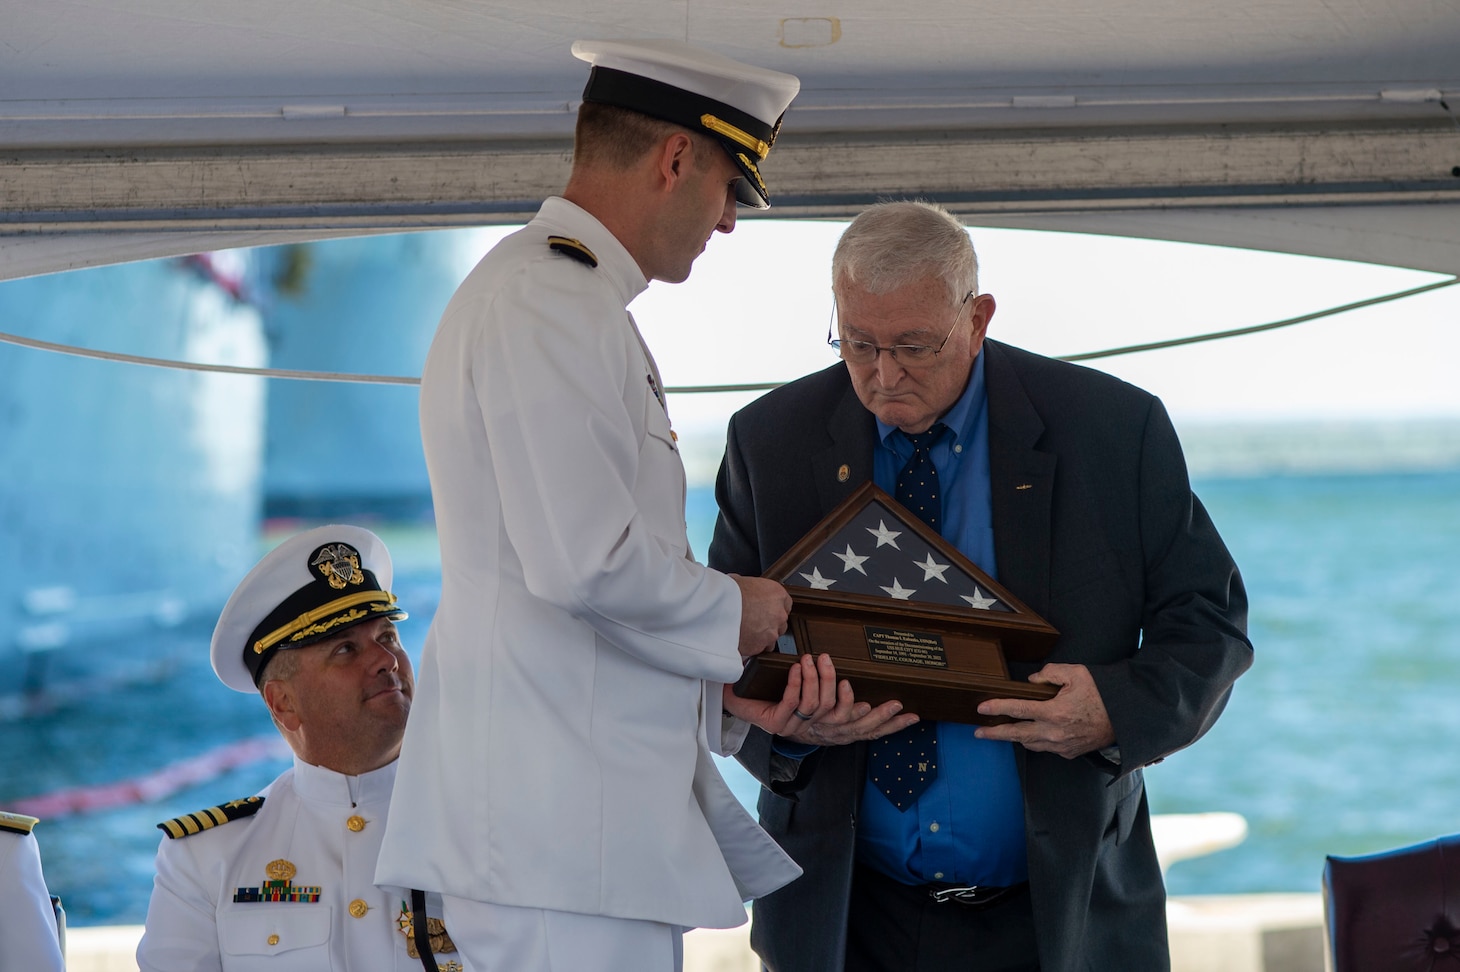 NORFOLK (Oct. 23, 2022) – Cmdr. Thad D. Tasso, commanding officer, USS Hué City (CG 66), presents Retired Capt. Tom Eubanks, Hué City’s first commanding officer, the Ensign flown Sept. 14, 2022 marking the 31st anniversary of the ship’s commissioning, during the decommissioning ceremony of the Ticonderoga-class guided-missile cruiser USS Hué City (CG 66) after 31 years of naval service. Following decommissioning, the ship is slated to be towed to

the Navy’s Inactive Ship’s facility in Philadelphia, Pa., where it will be in a Logistical Support Asset status. (U.S. Navy photo by Mass Communications Specialist 2 nd Class Darien G. Kenney)